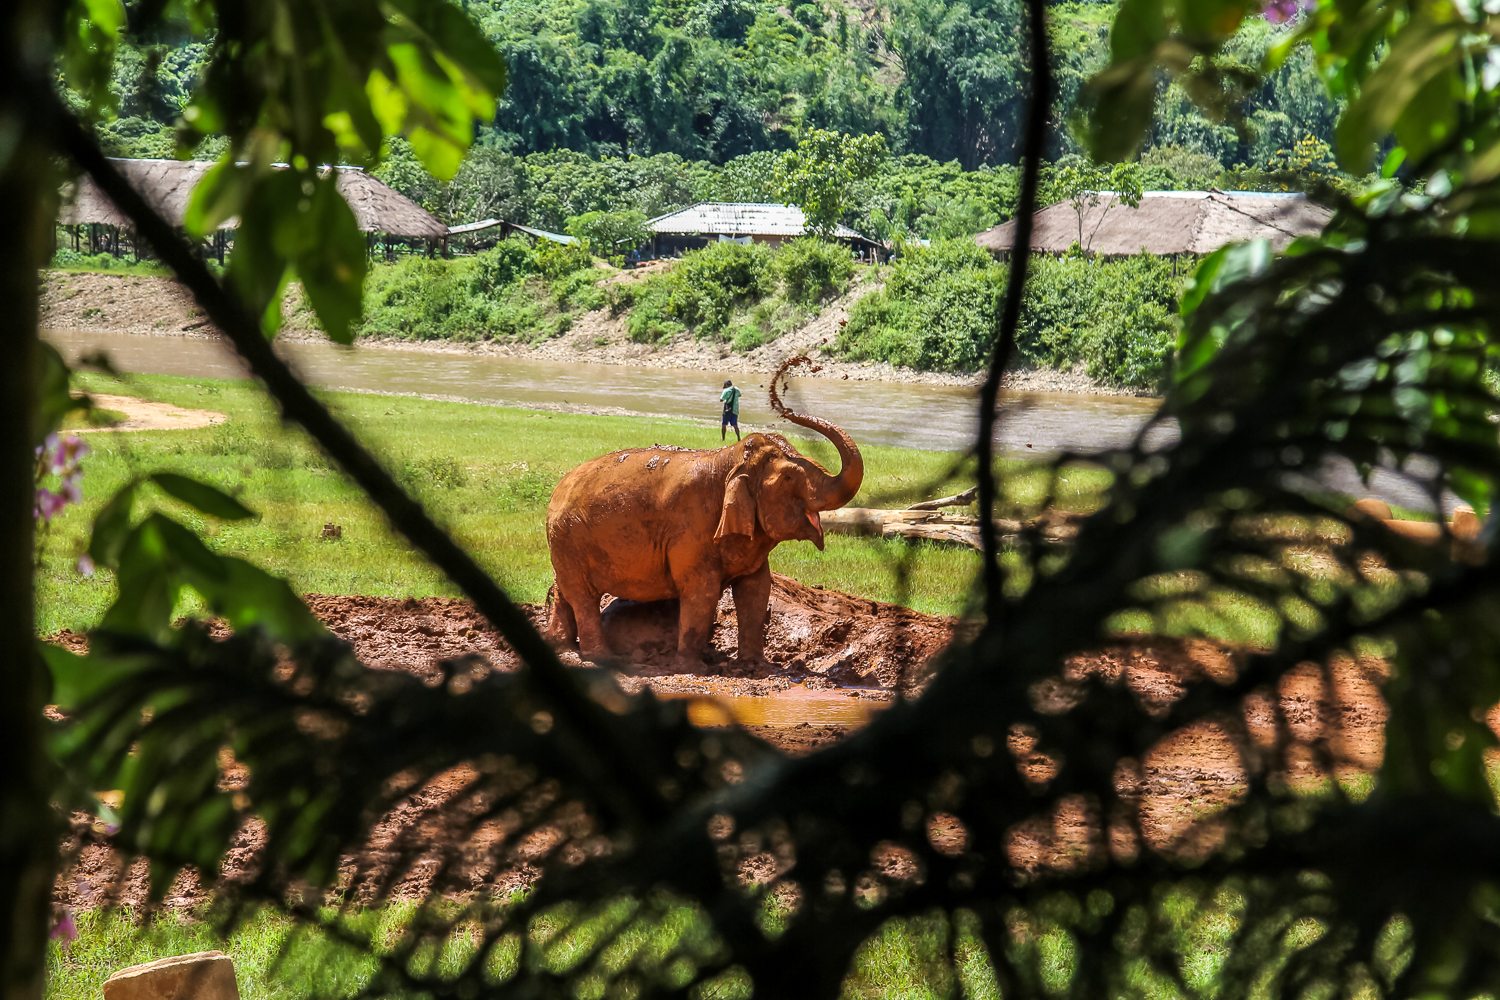 Through some trees an elephant is spotting in a mud bath, trunk in the air spraying itself with water